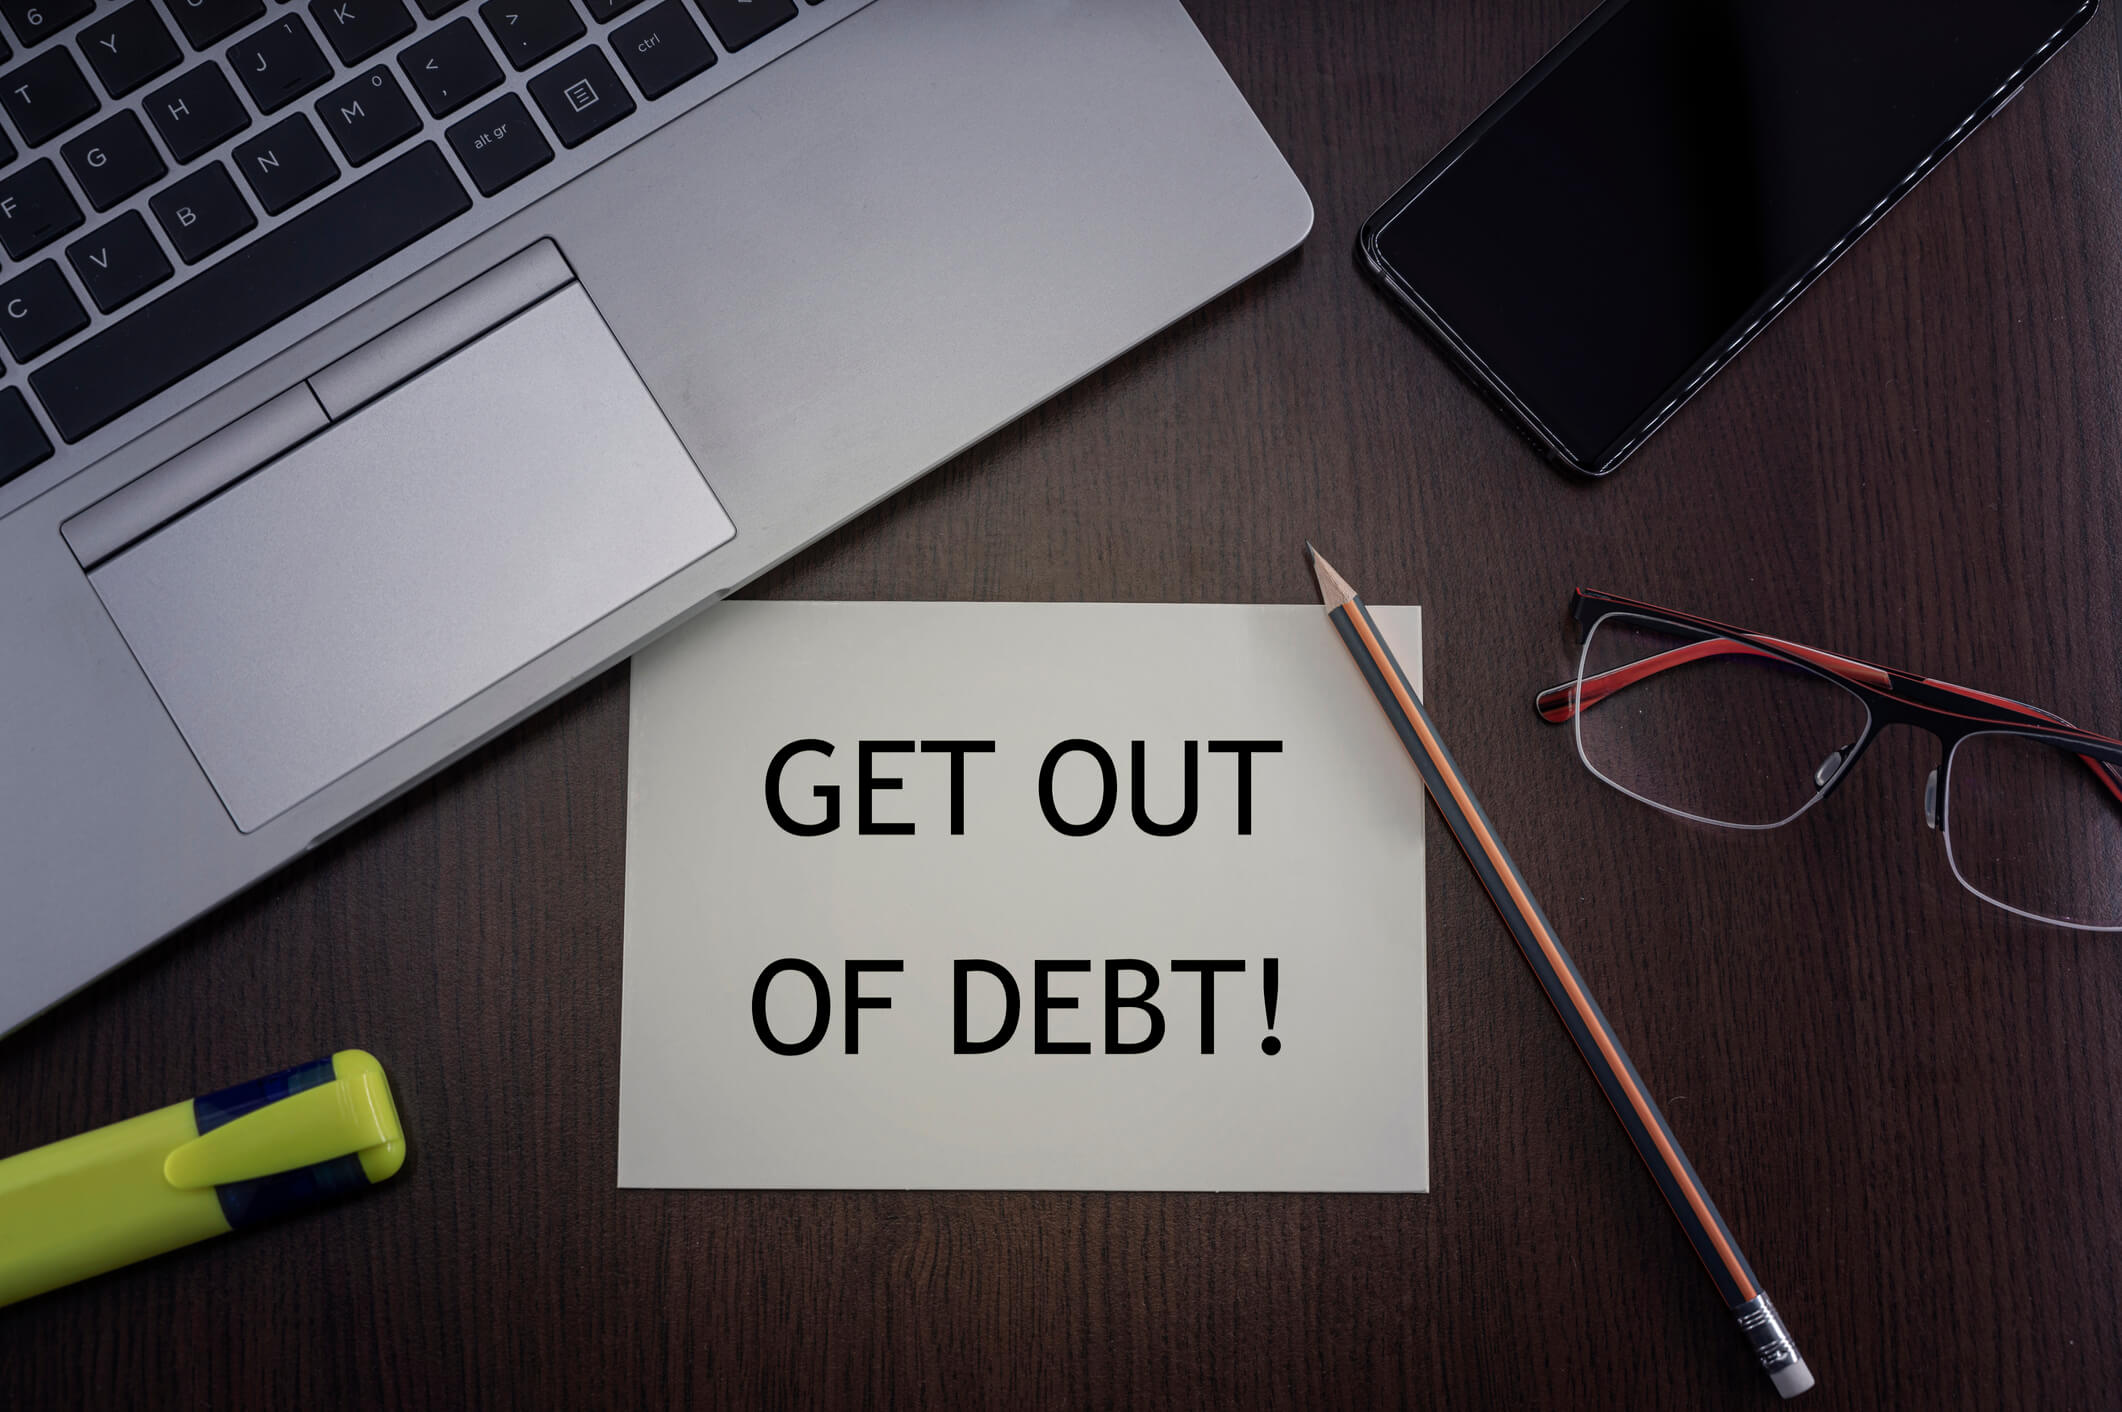 Get Out Of Debt - Complete Controller